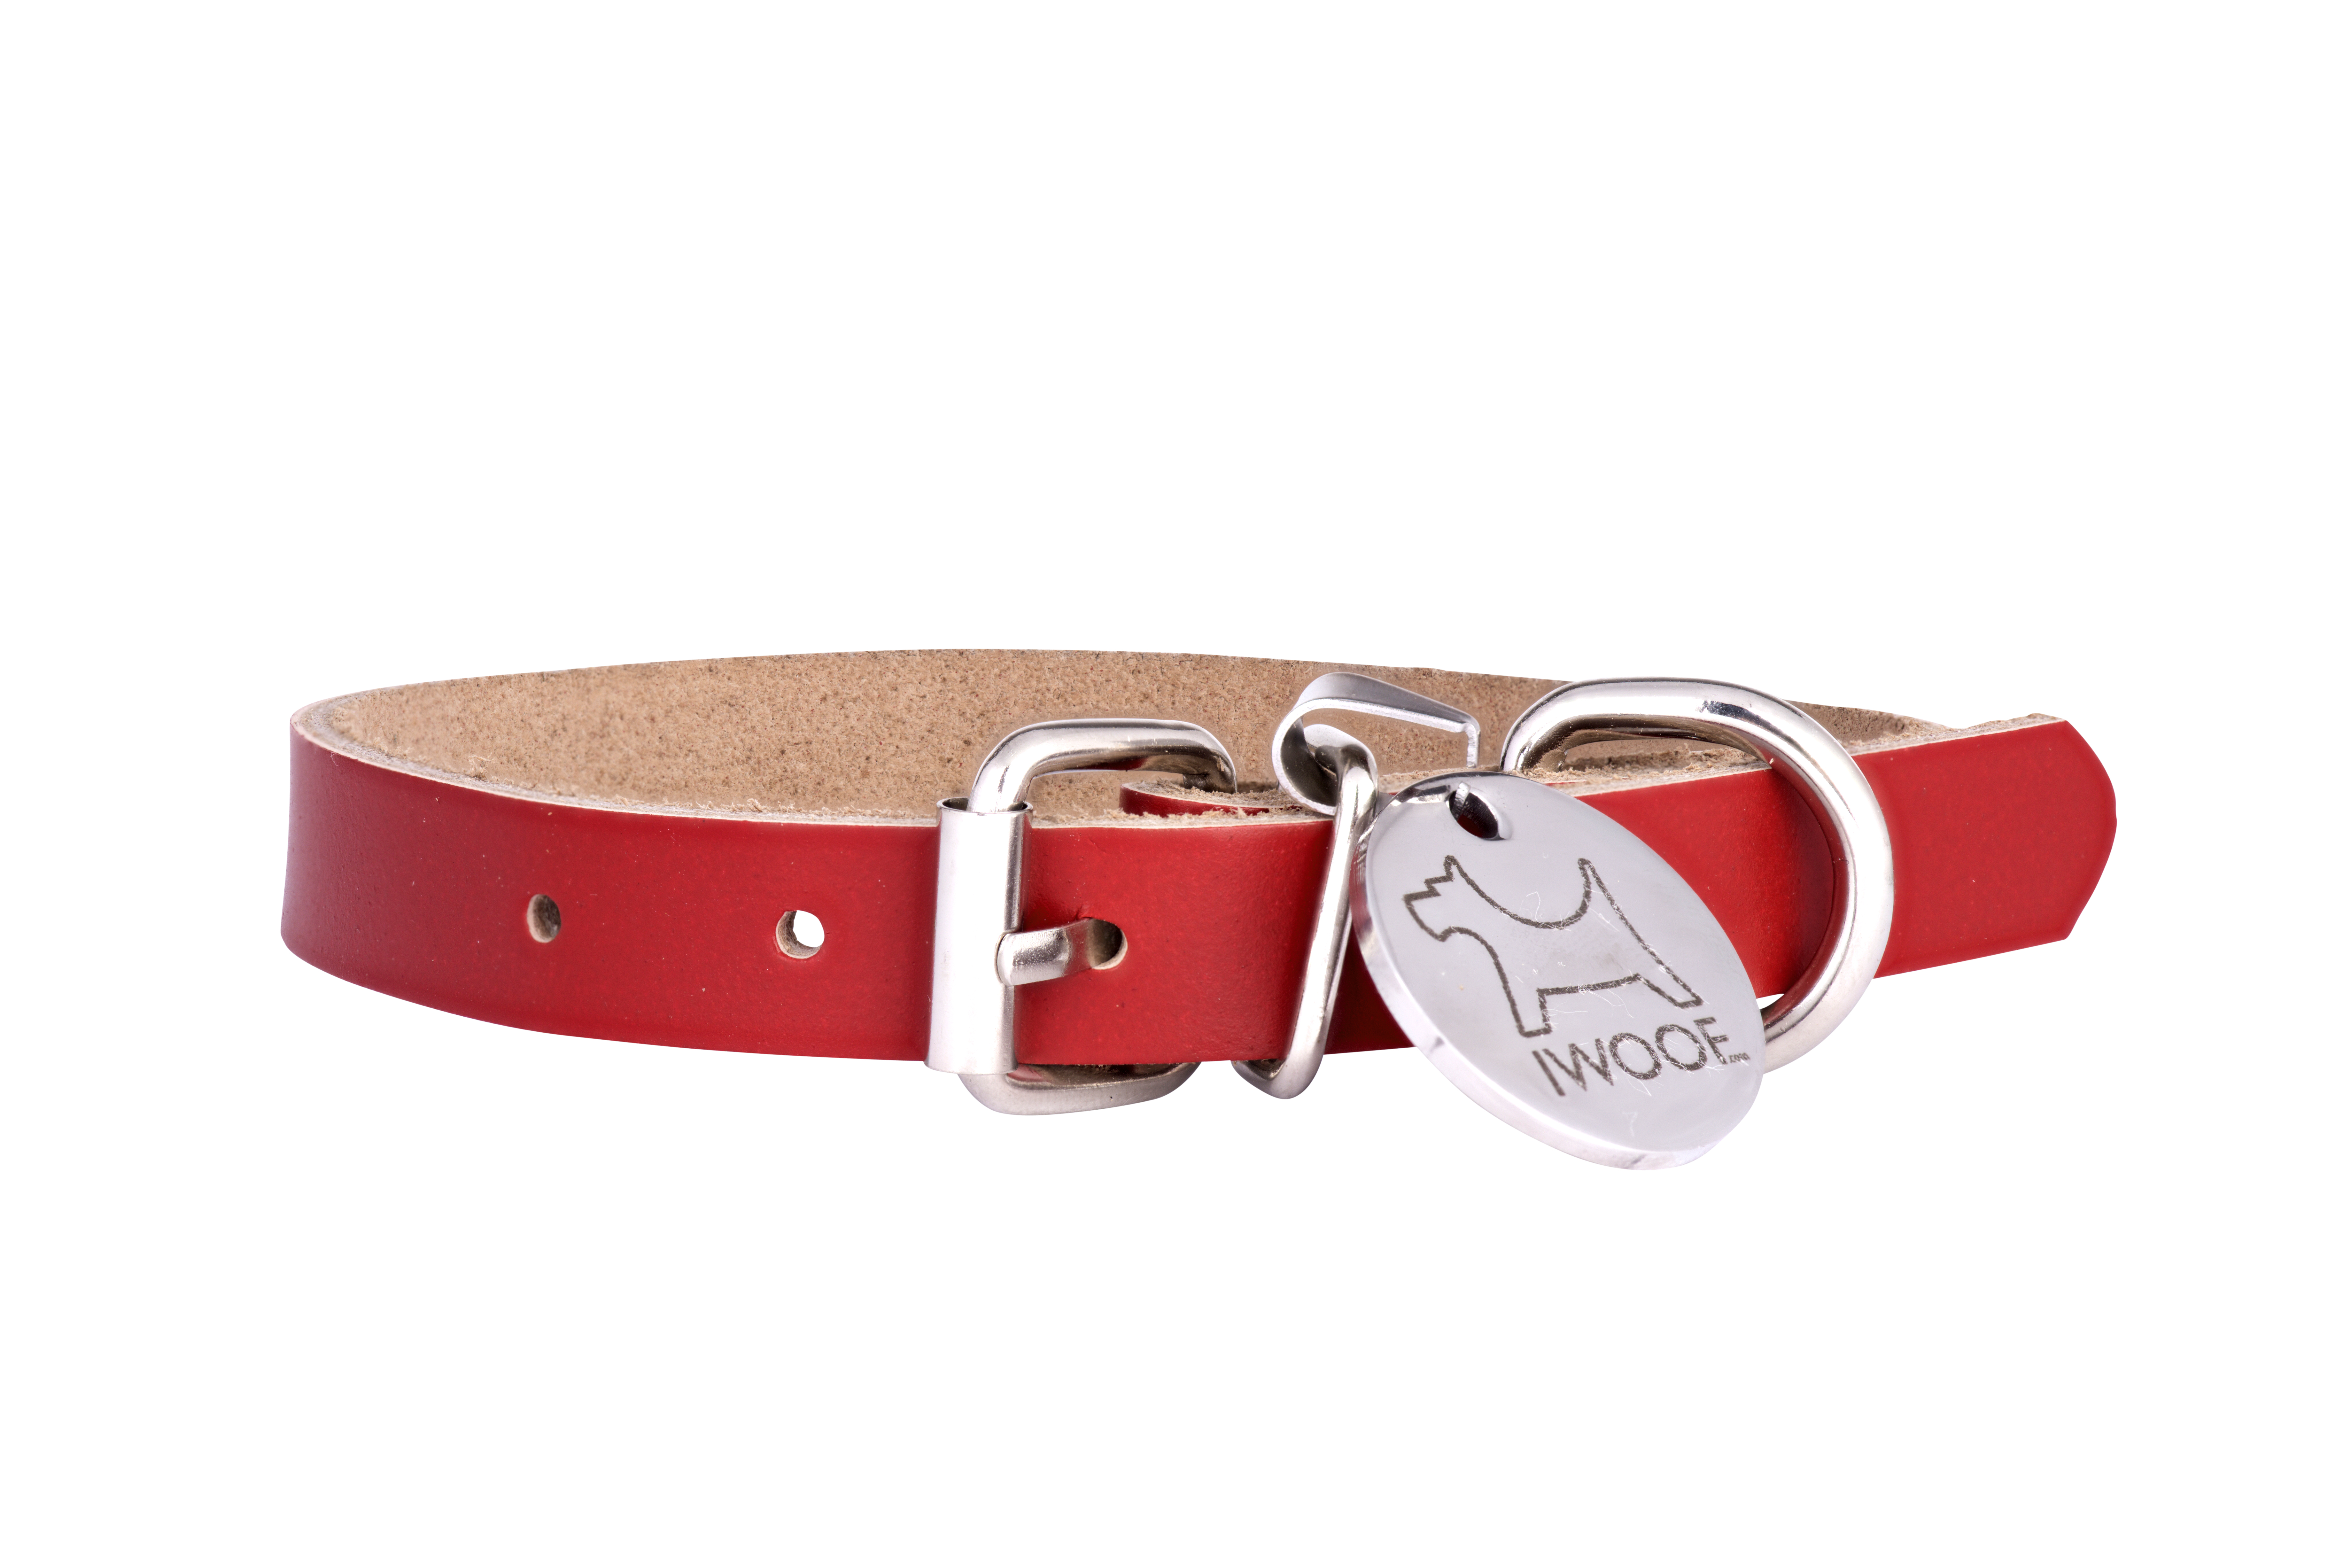 Morwenna designer dog collar and dog lead in red by IWOOF